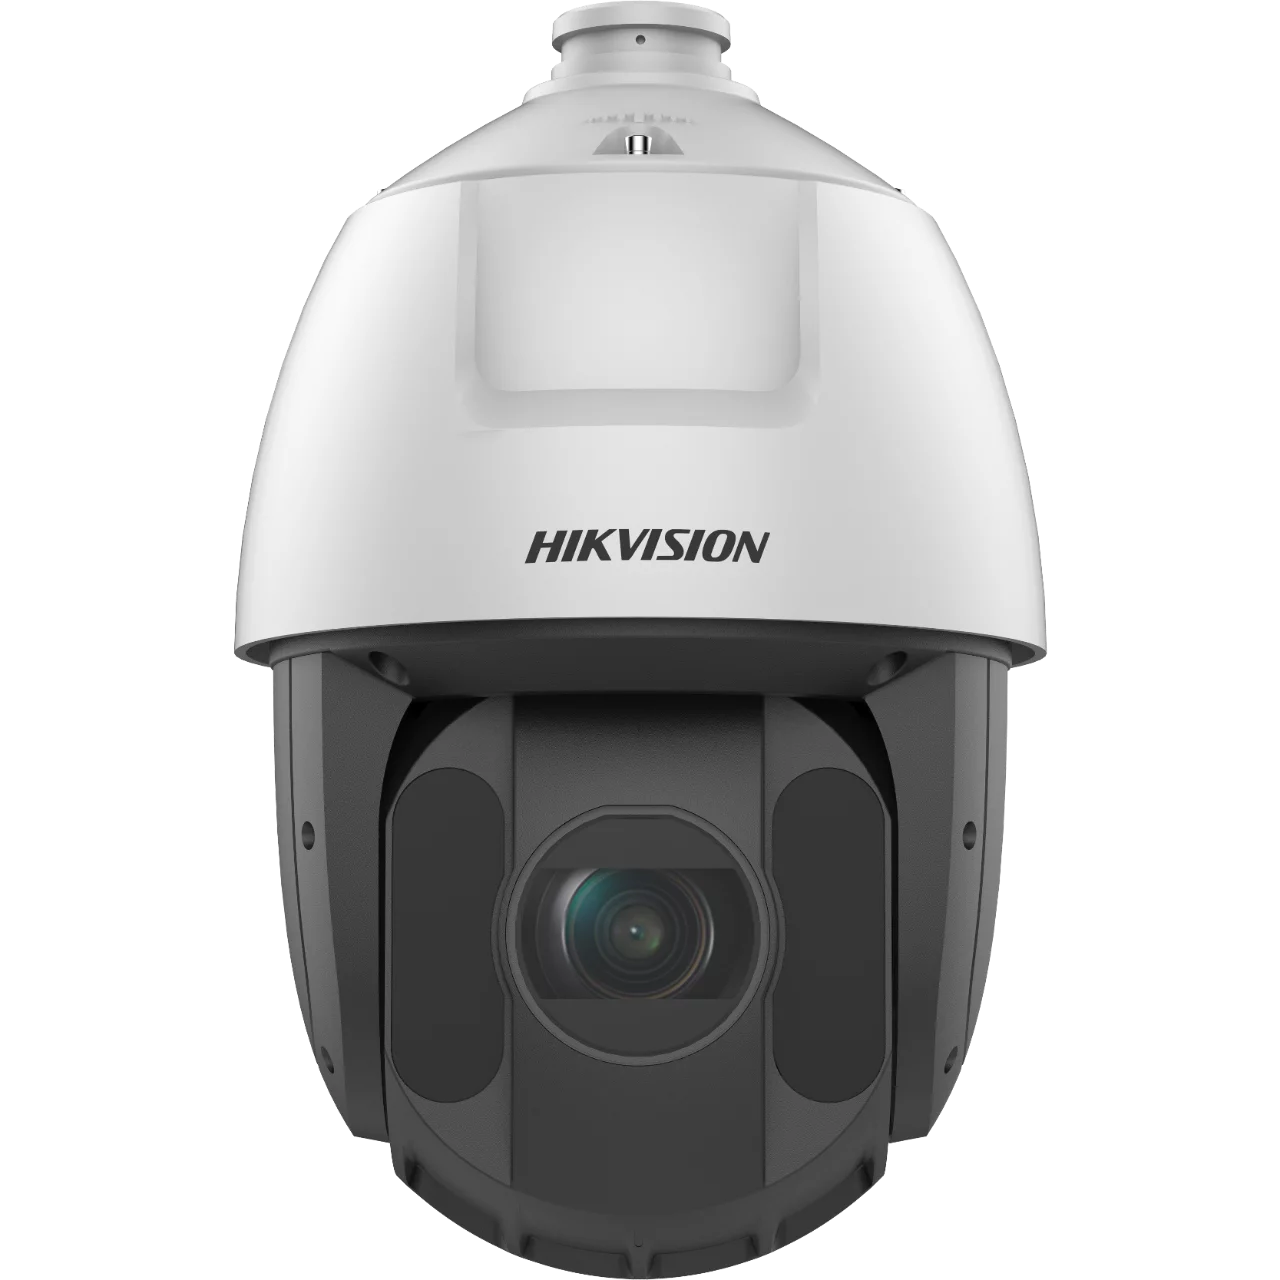 Hikvision 5-inch 4 MP 25X Powered by DarkFighter IR Network Speed Dome Camera DS-2DE5425IW-AE(T5)